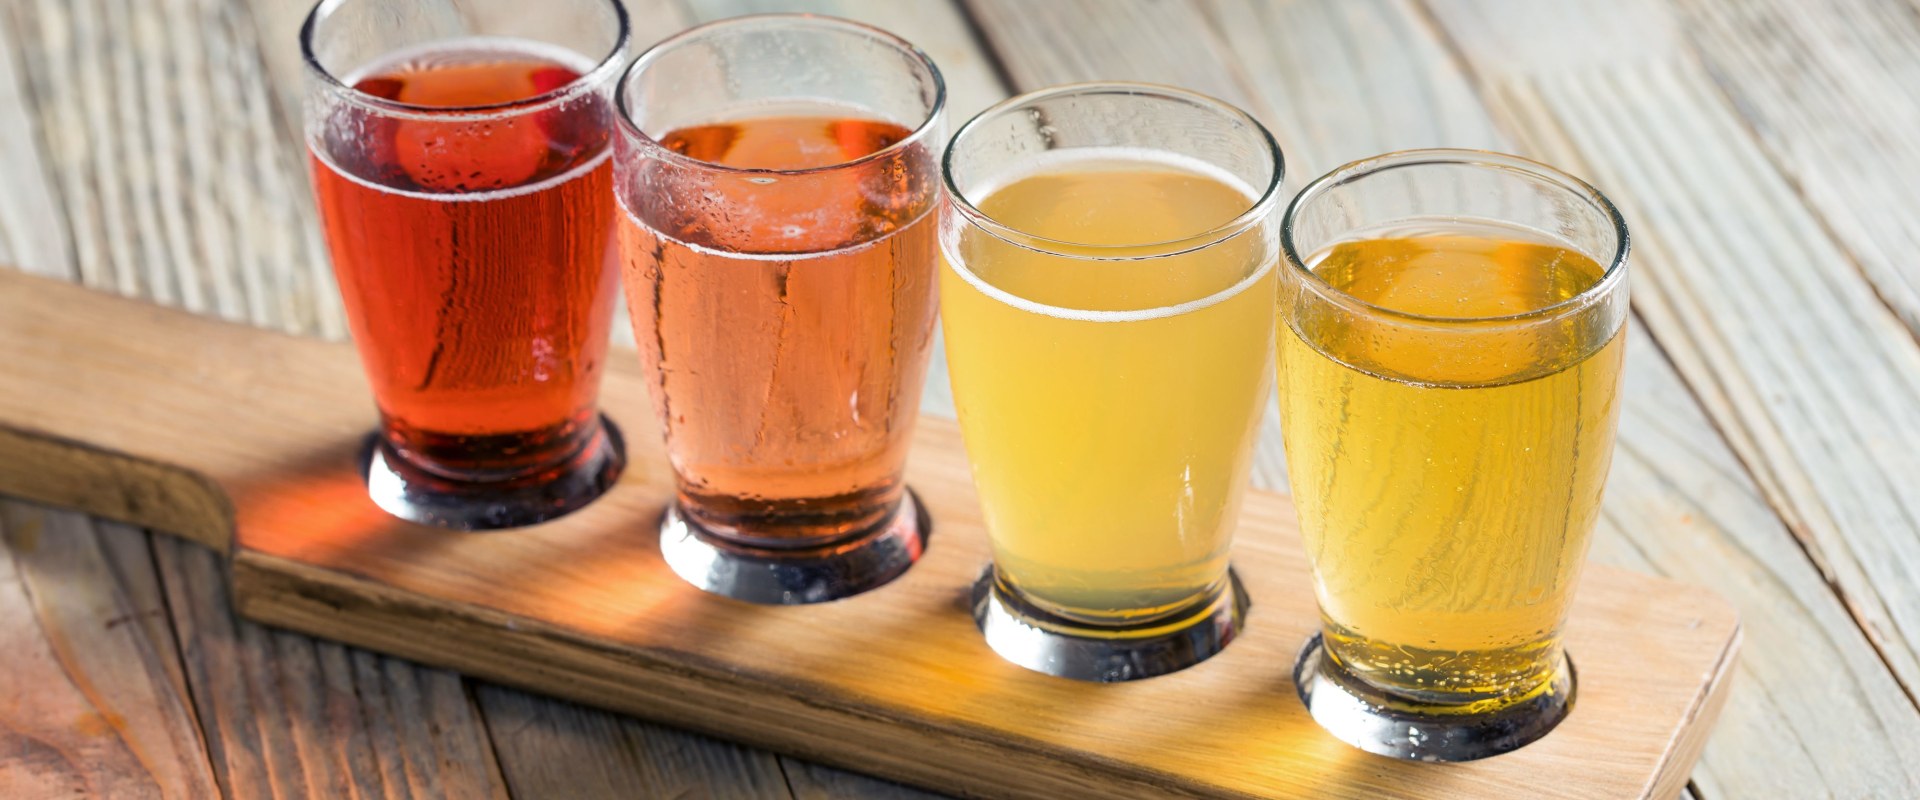 Are ciders healthy for you?